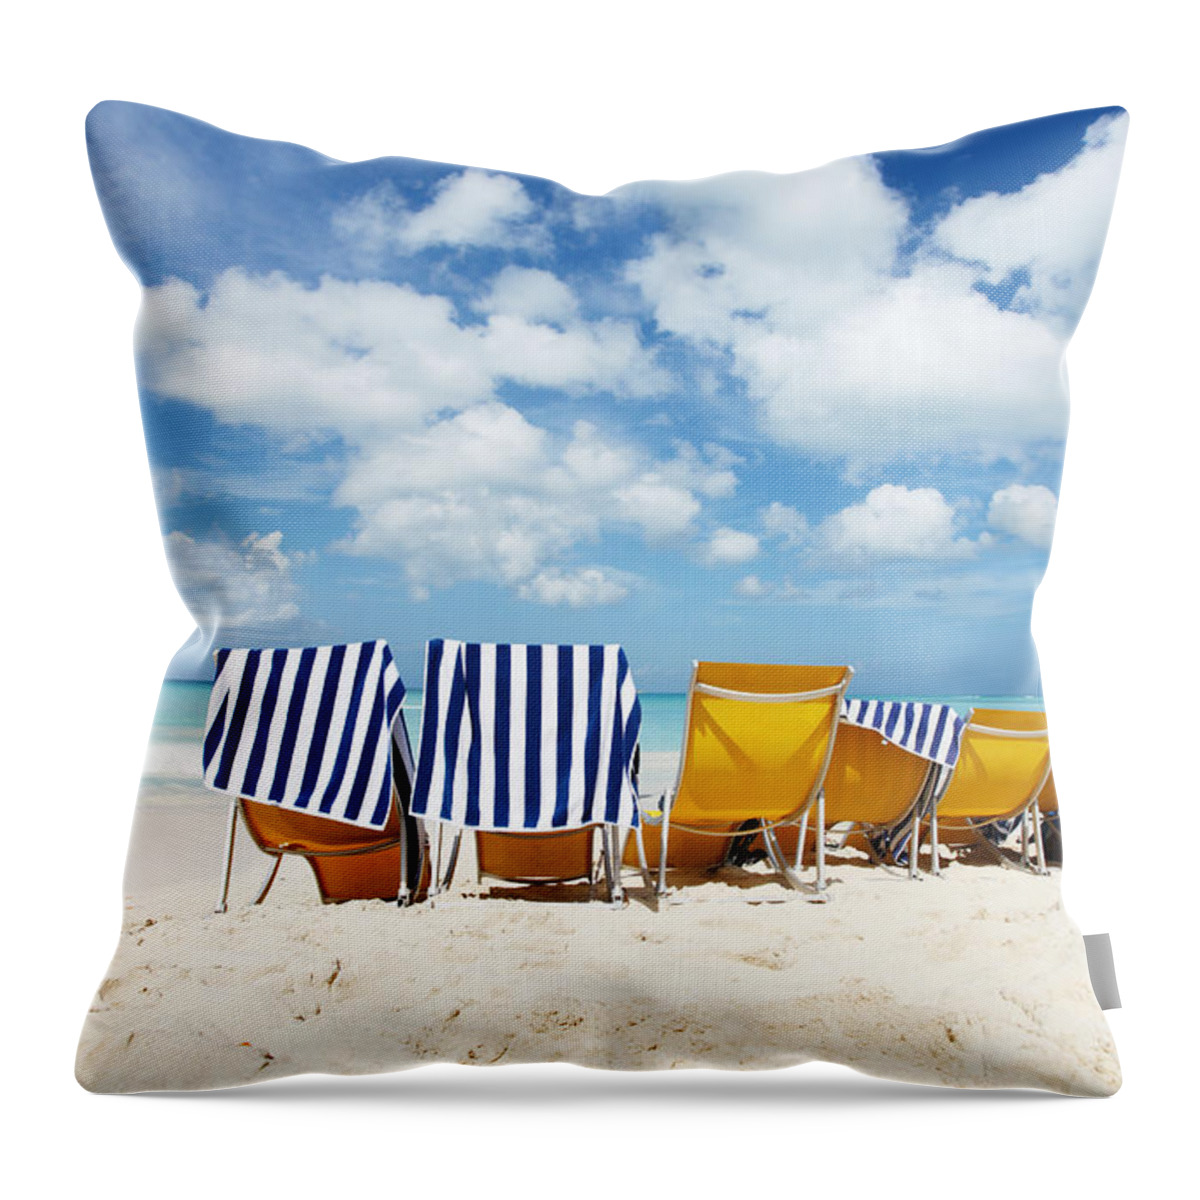 Tranquility Throw Pillow featuring the photograph Tranquil Beach Vacation by Nicholas Monu